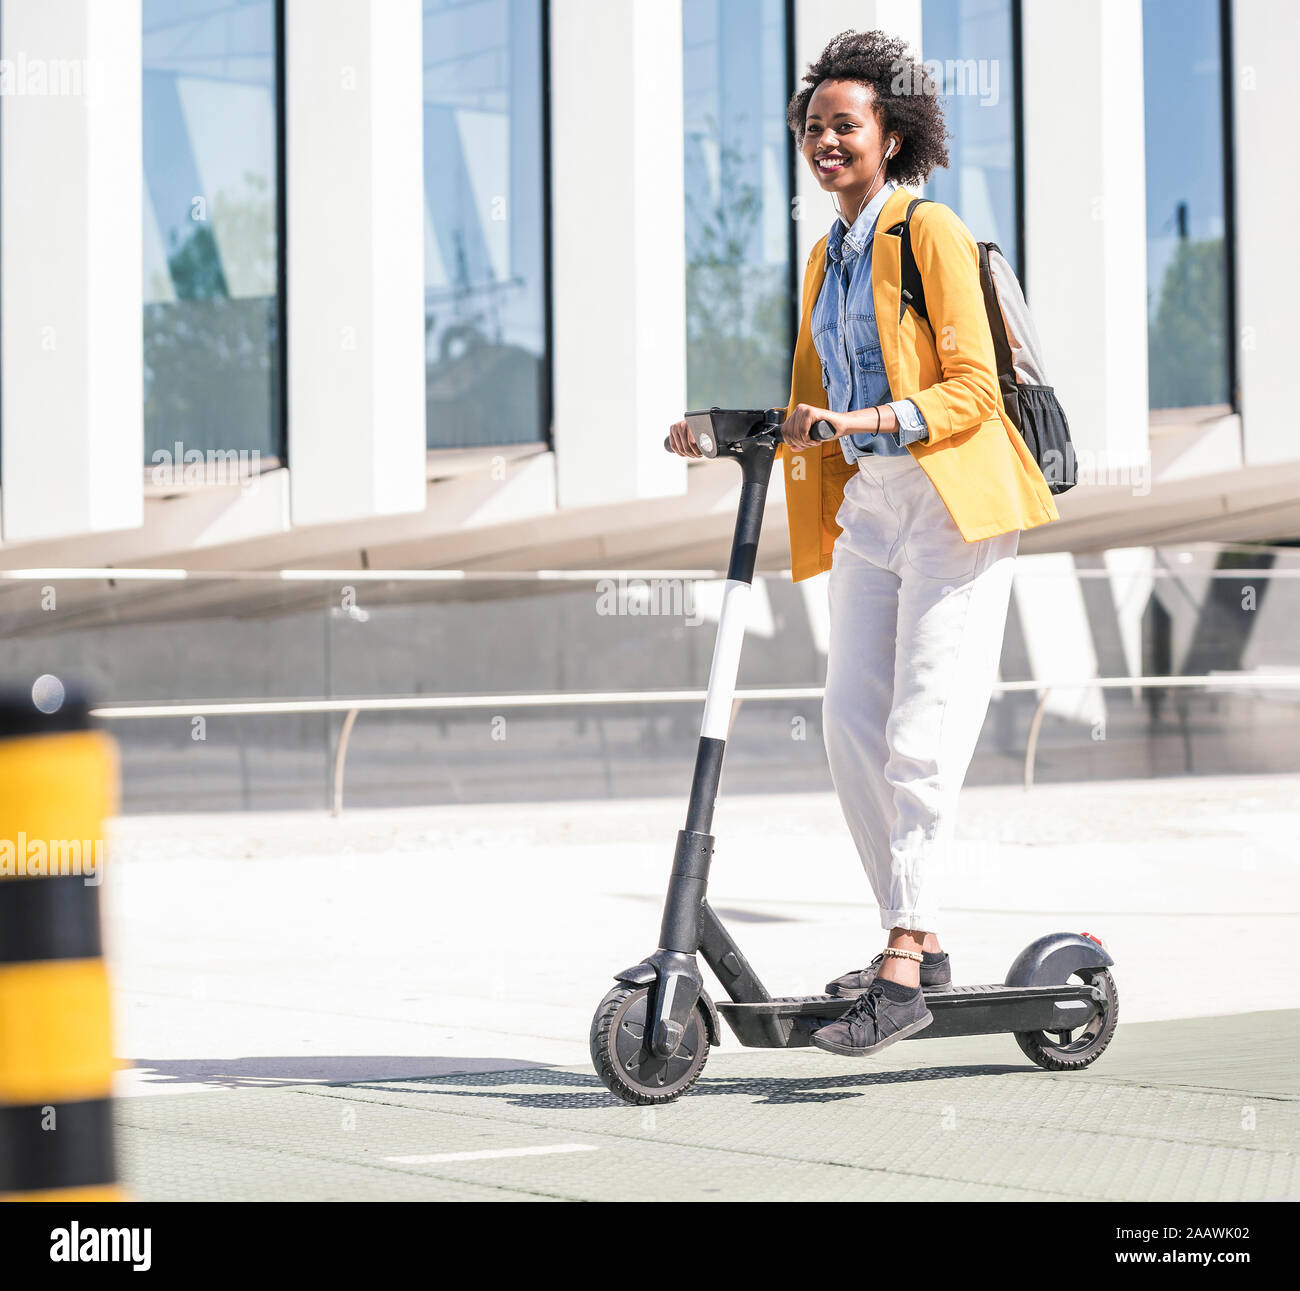 Happy young woman with earphones riding e-scooter in the city Stock Photo